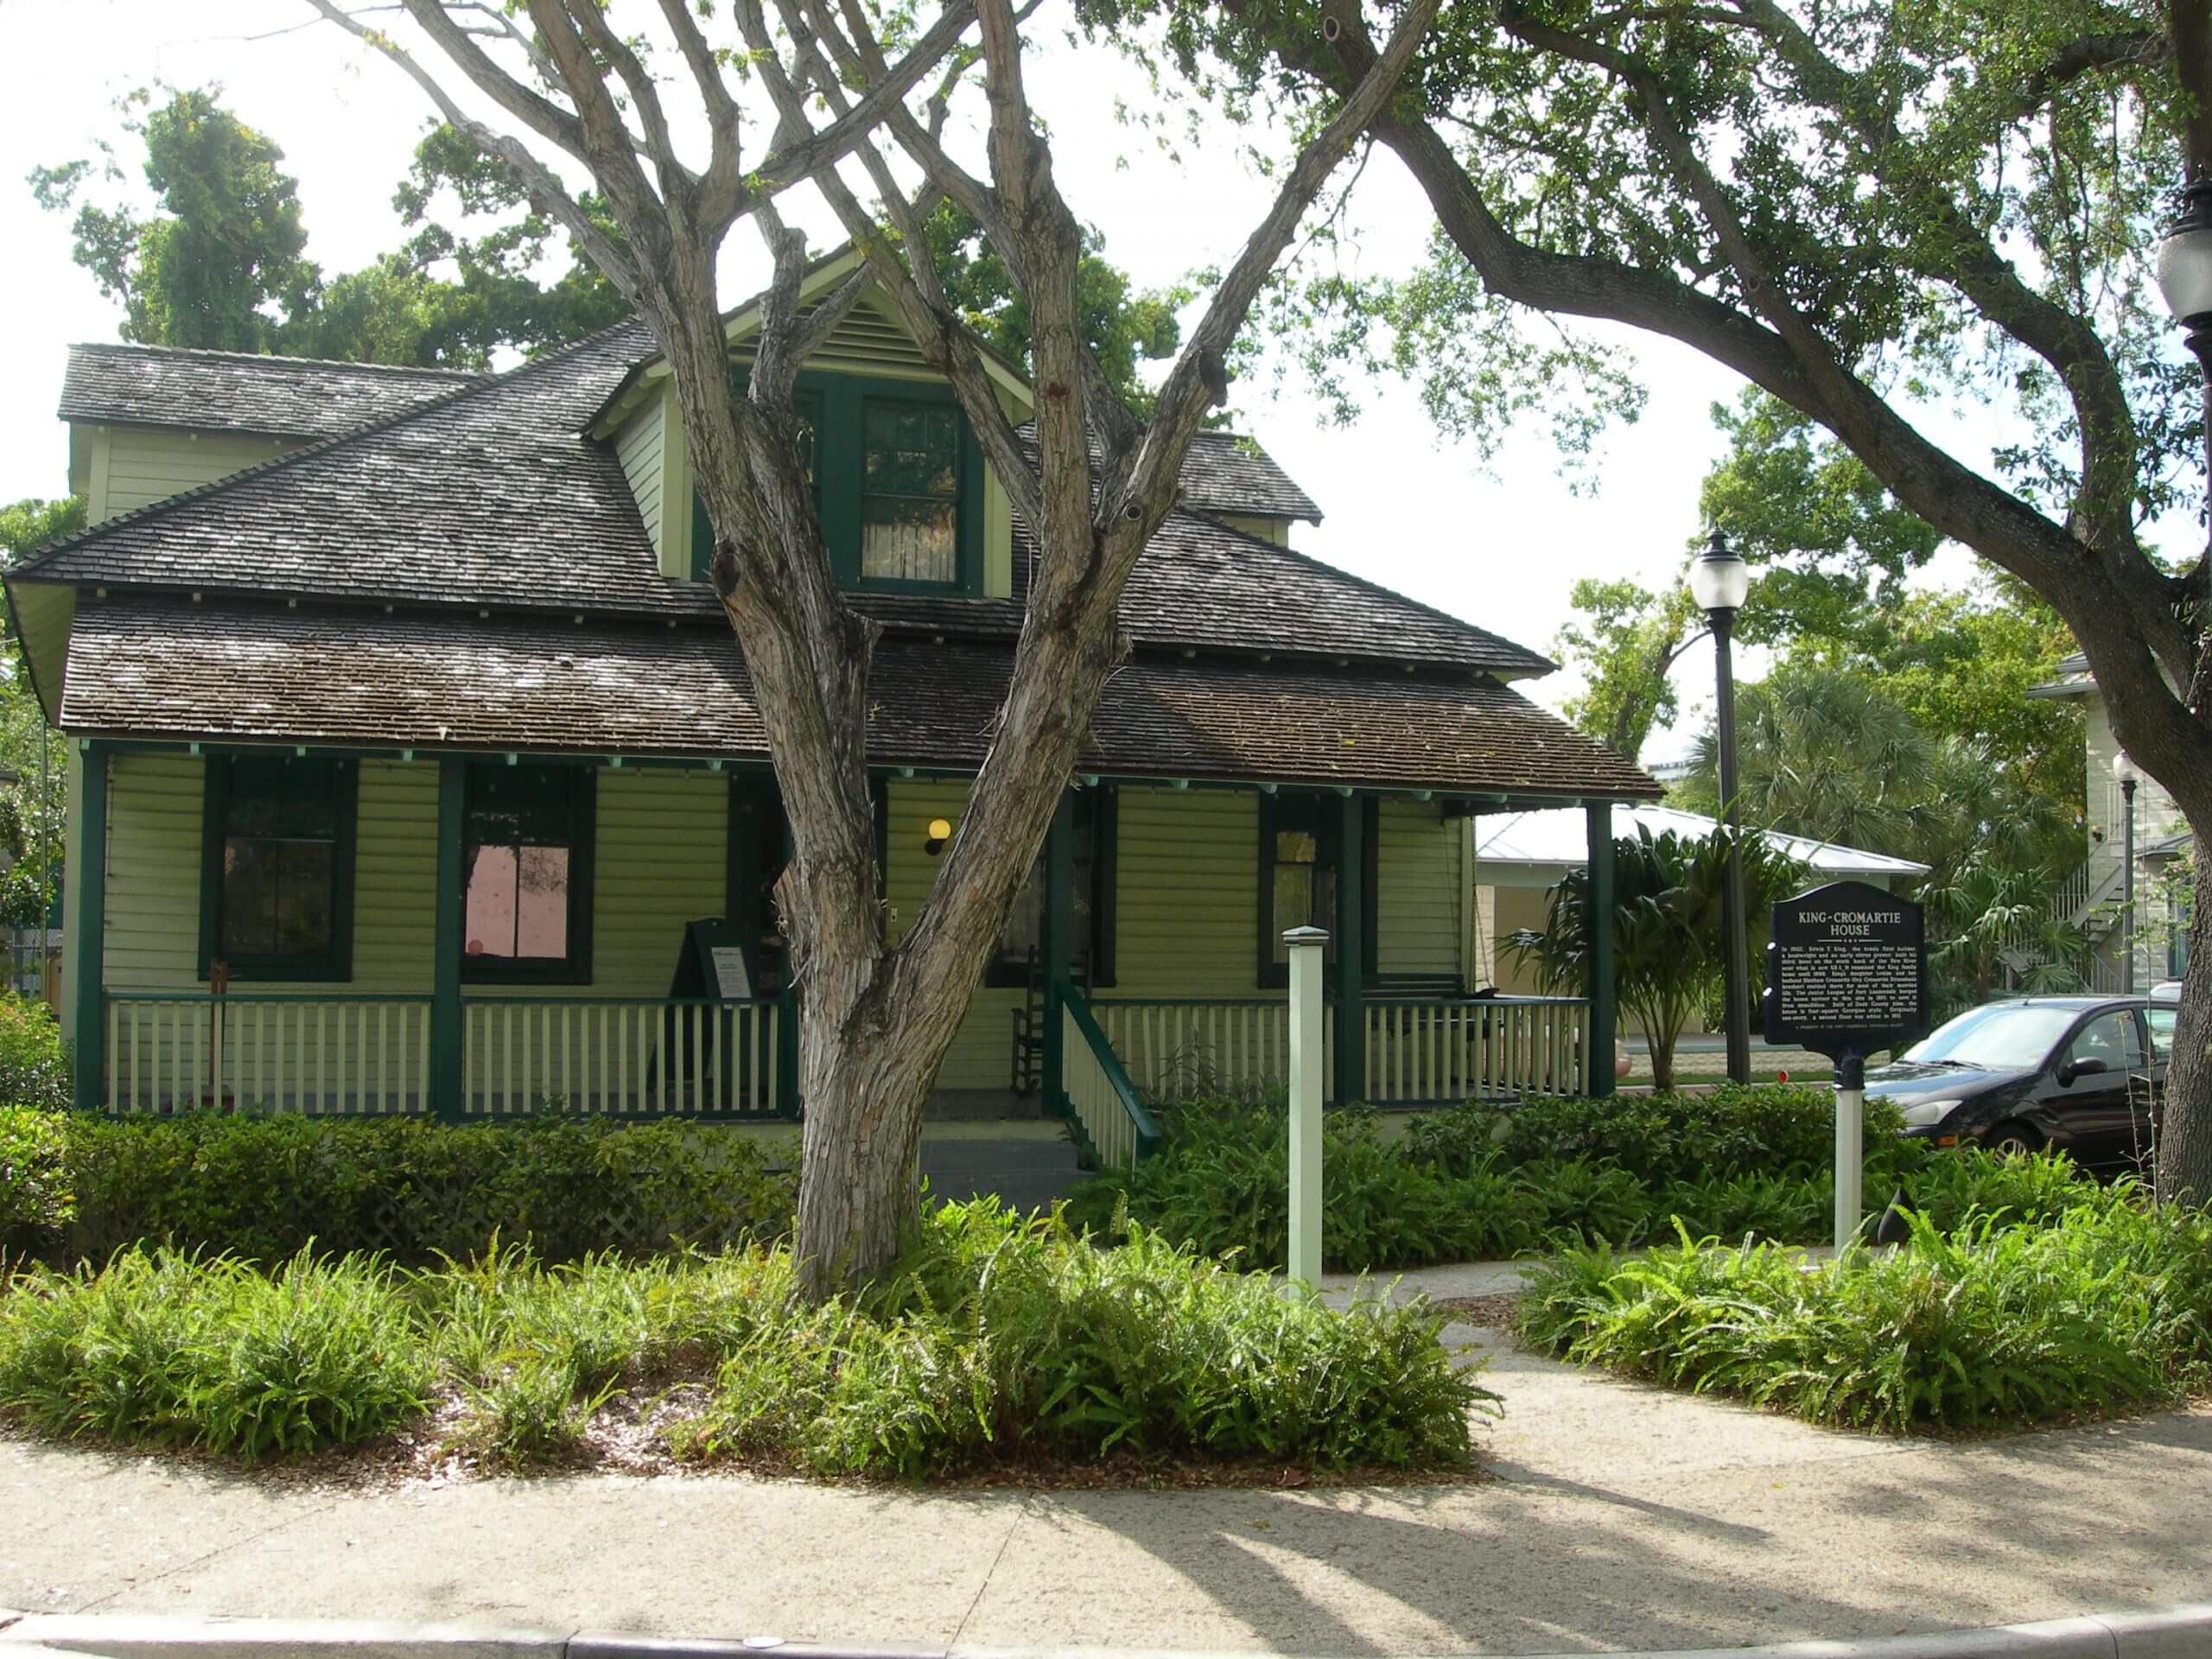 Frontal view of the King-Cromartie House in Fort Lauderdale